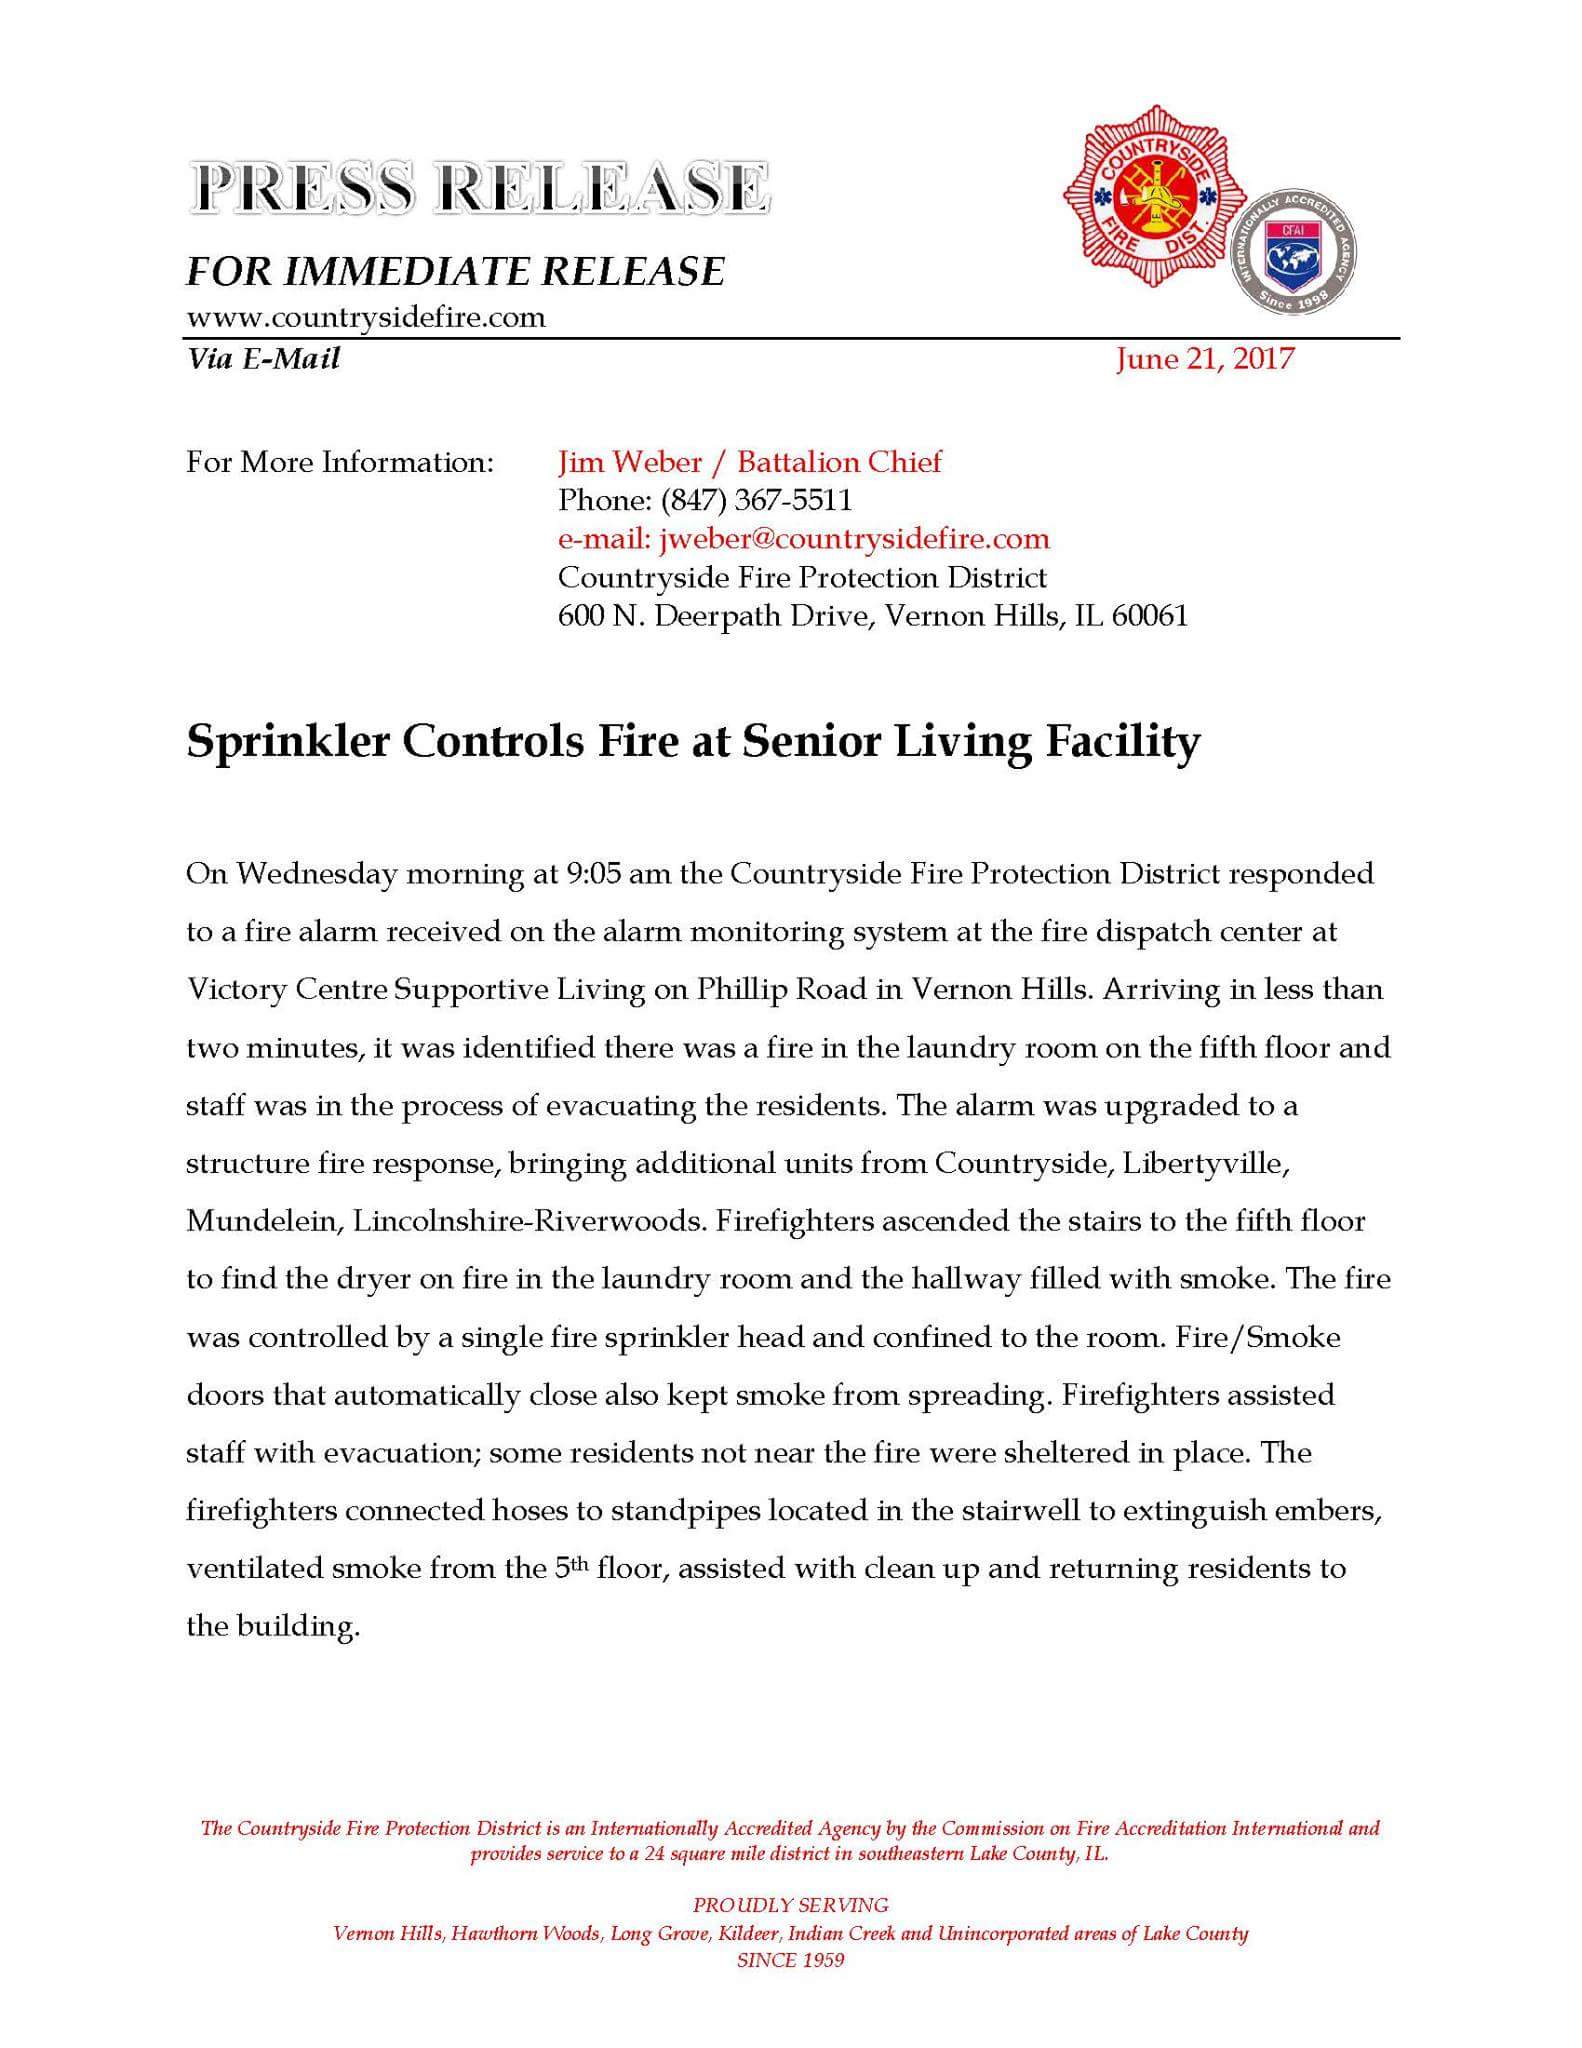 Countryside FPD Press Release